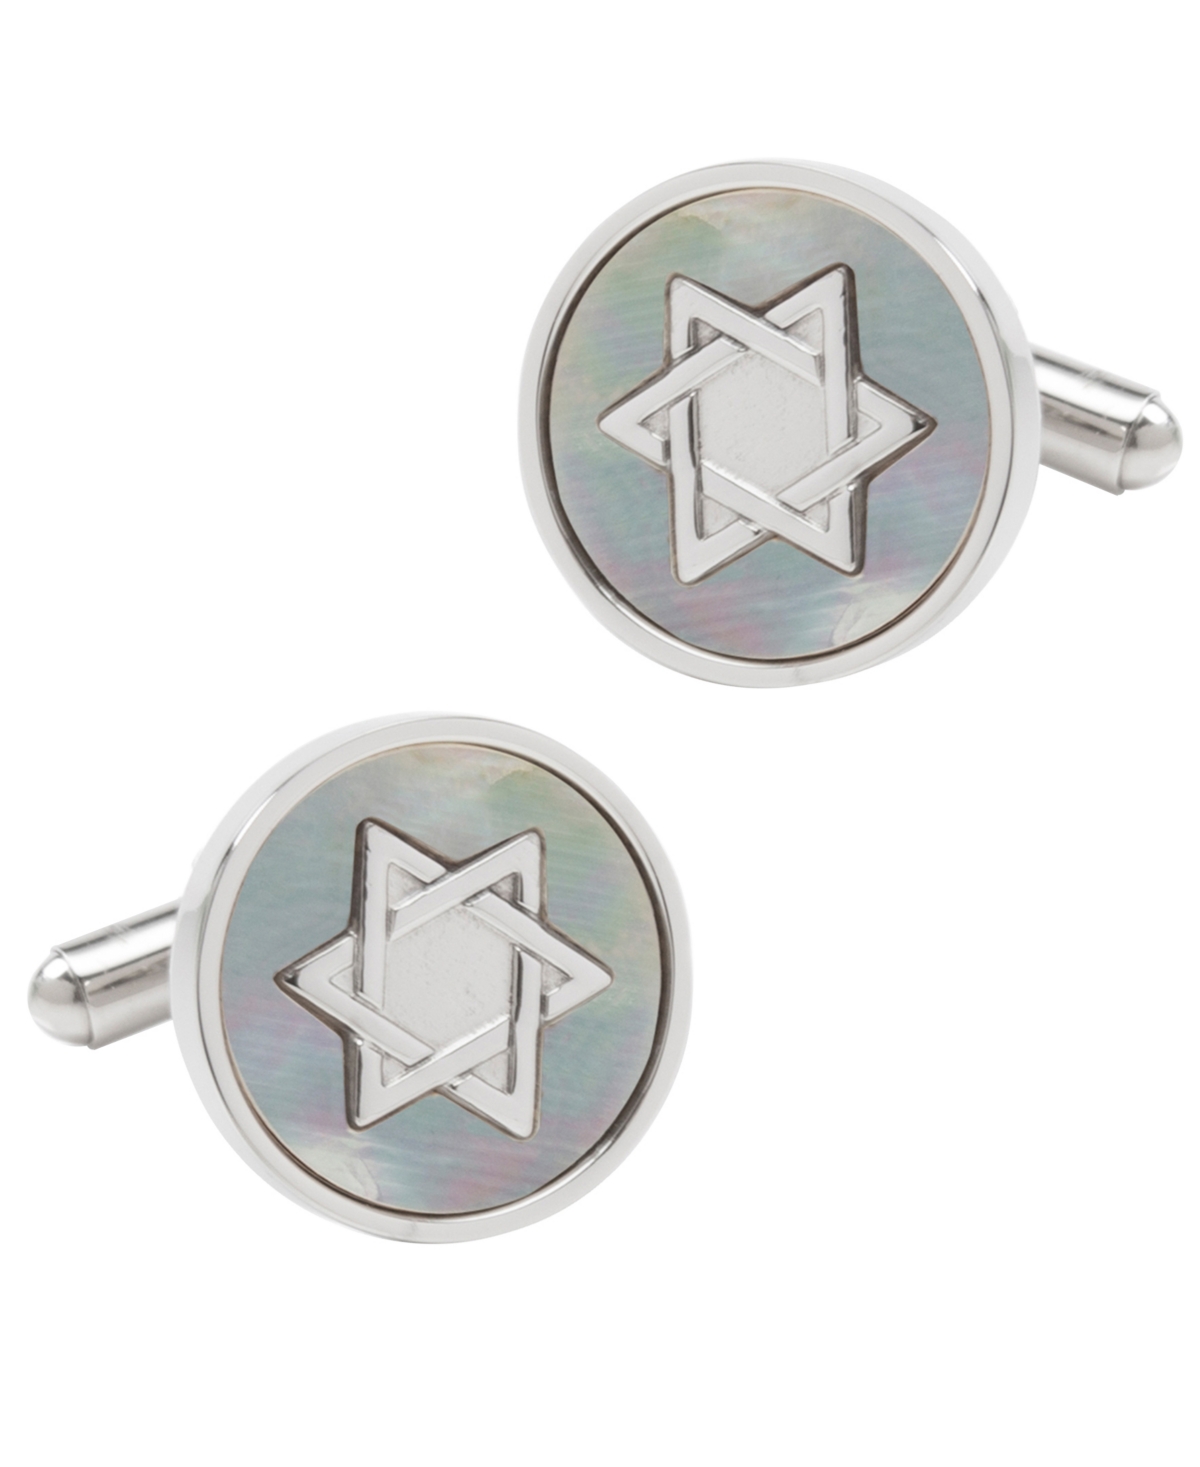 Men's Star of David Mother of Pearl Stainless Steel Cufflinks - White